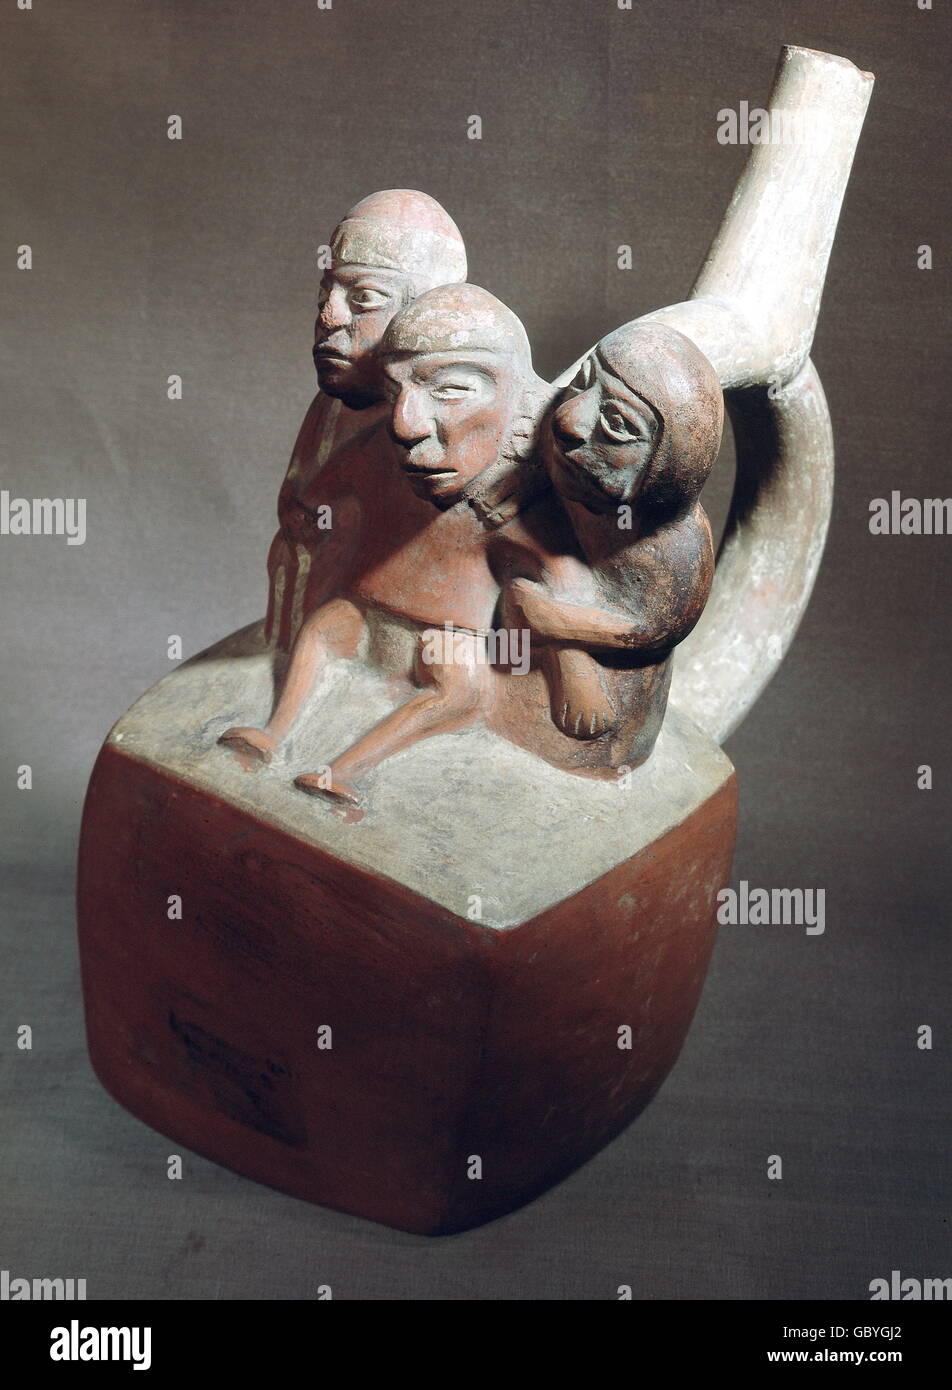 fine arts, South America, Peru, Mochica culture (Moche), handicrafts, handle can with depiction of the recovery of a drunkard, burial object, clay, 4th century AD, ethnological museum, Berlin, Stock Photo